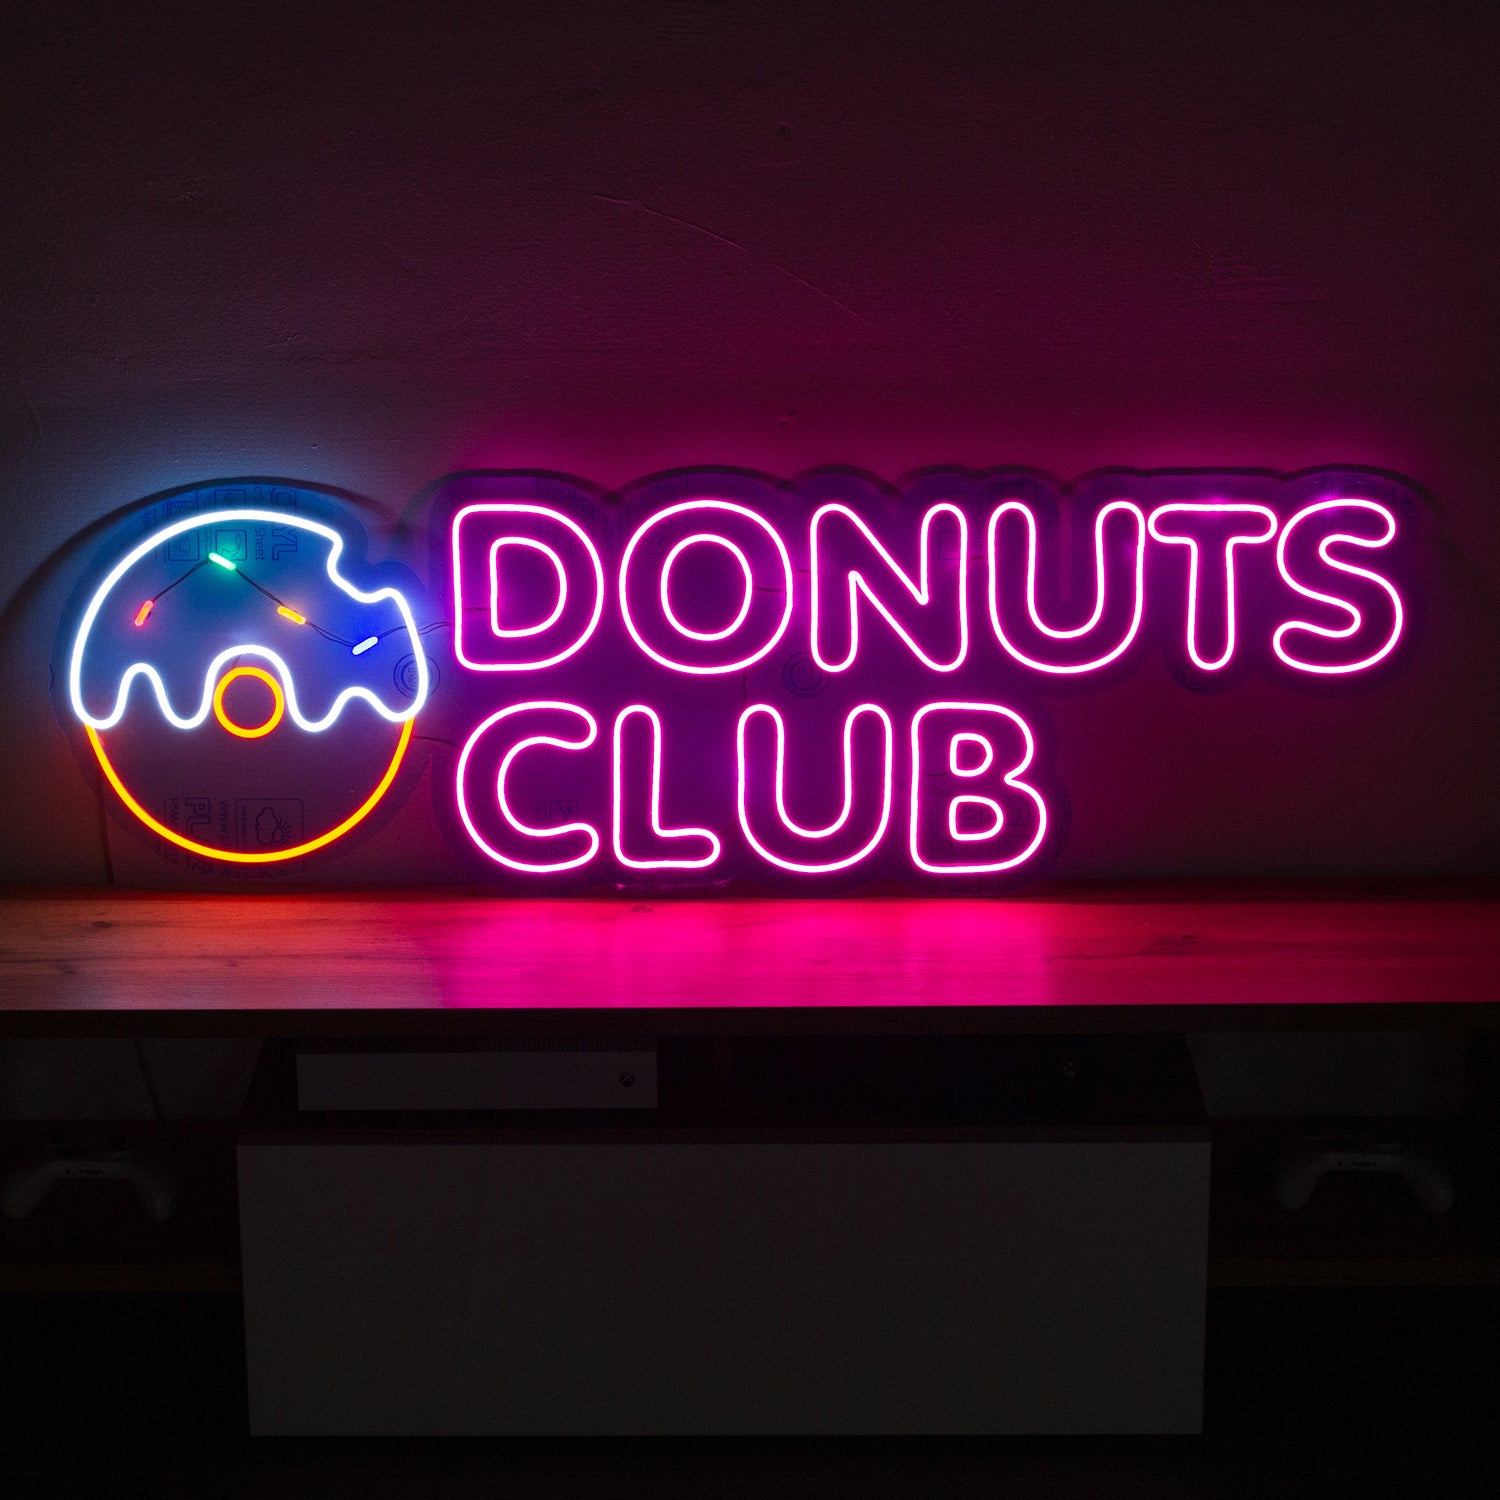 LED neon sign "Donuts Club"